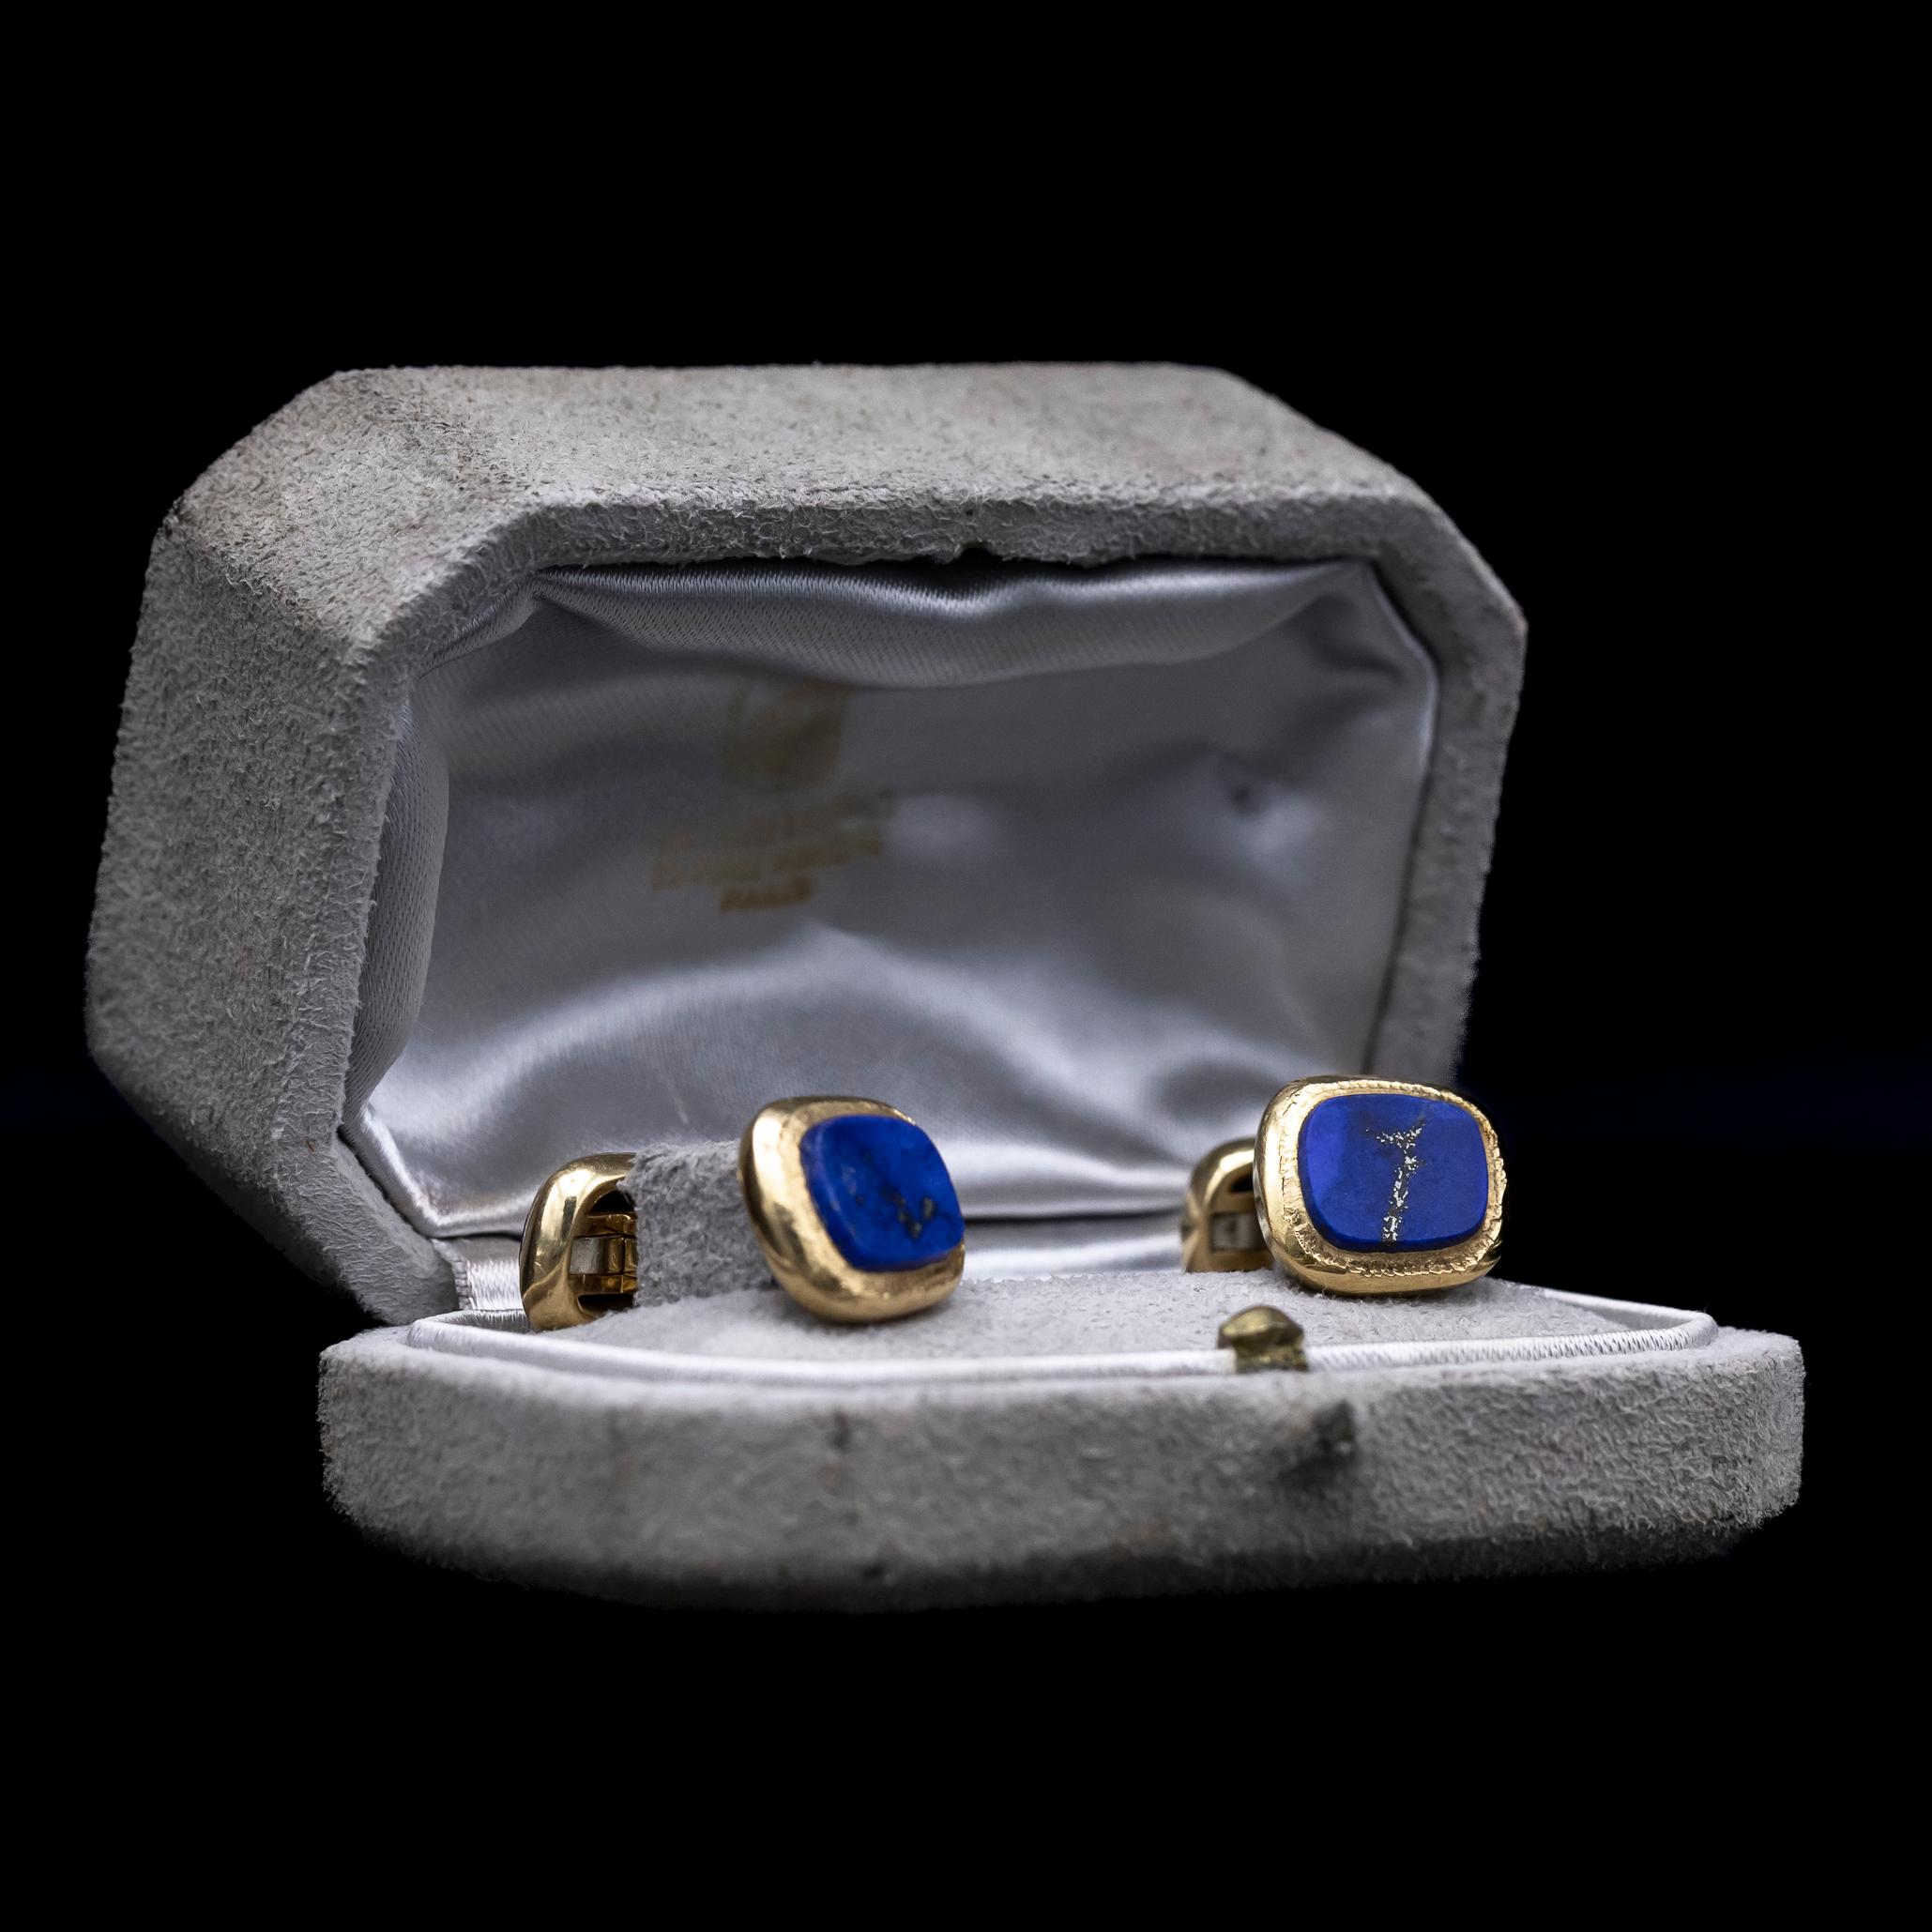 Van Cleef & Arpels presents an exquisite pair of cufflinks crafted by the skilled hands of Georges Lenfant in 18kt yellow gold, originating from France circa 1967. Each cufflink boasts two asymmetrical cushion-shaped plaques, intricately textured in